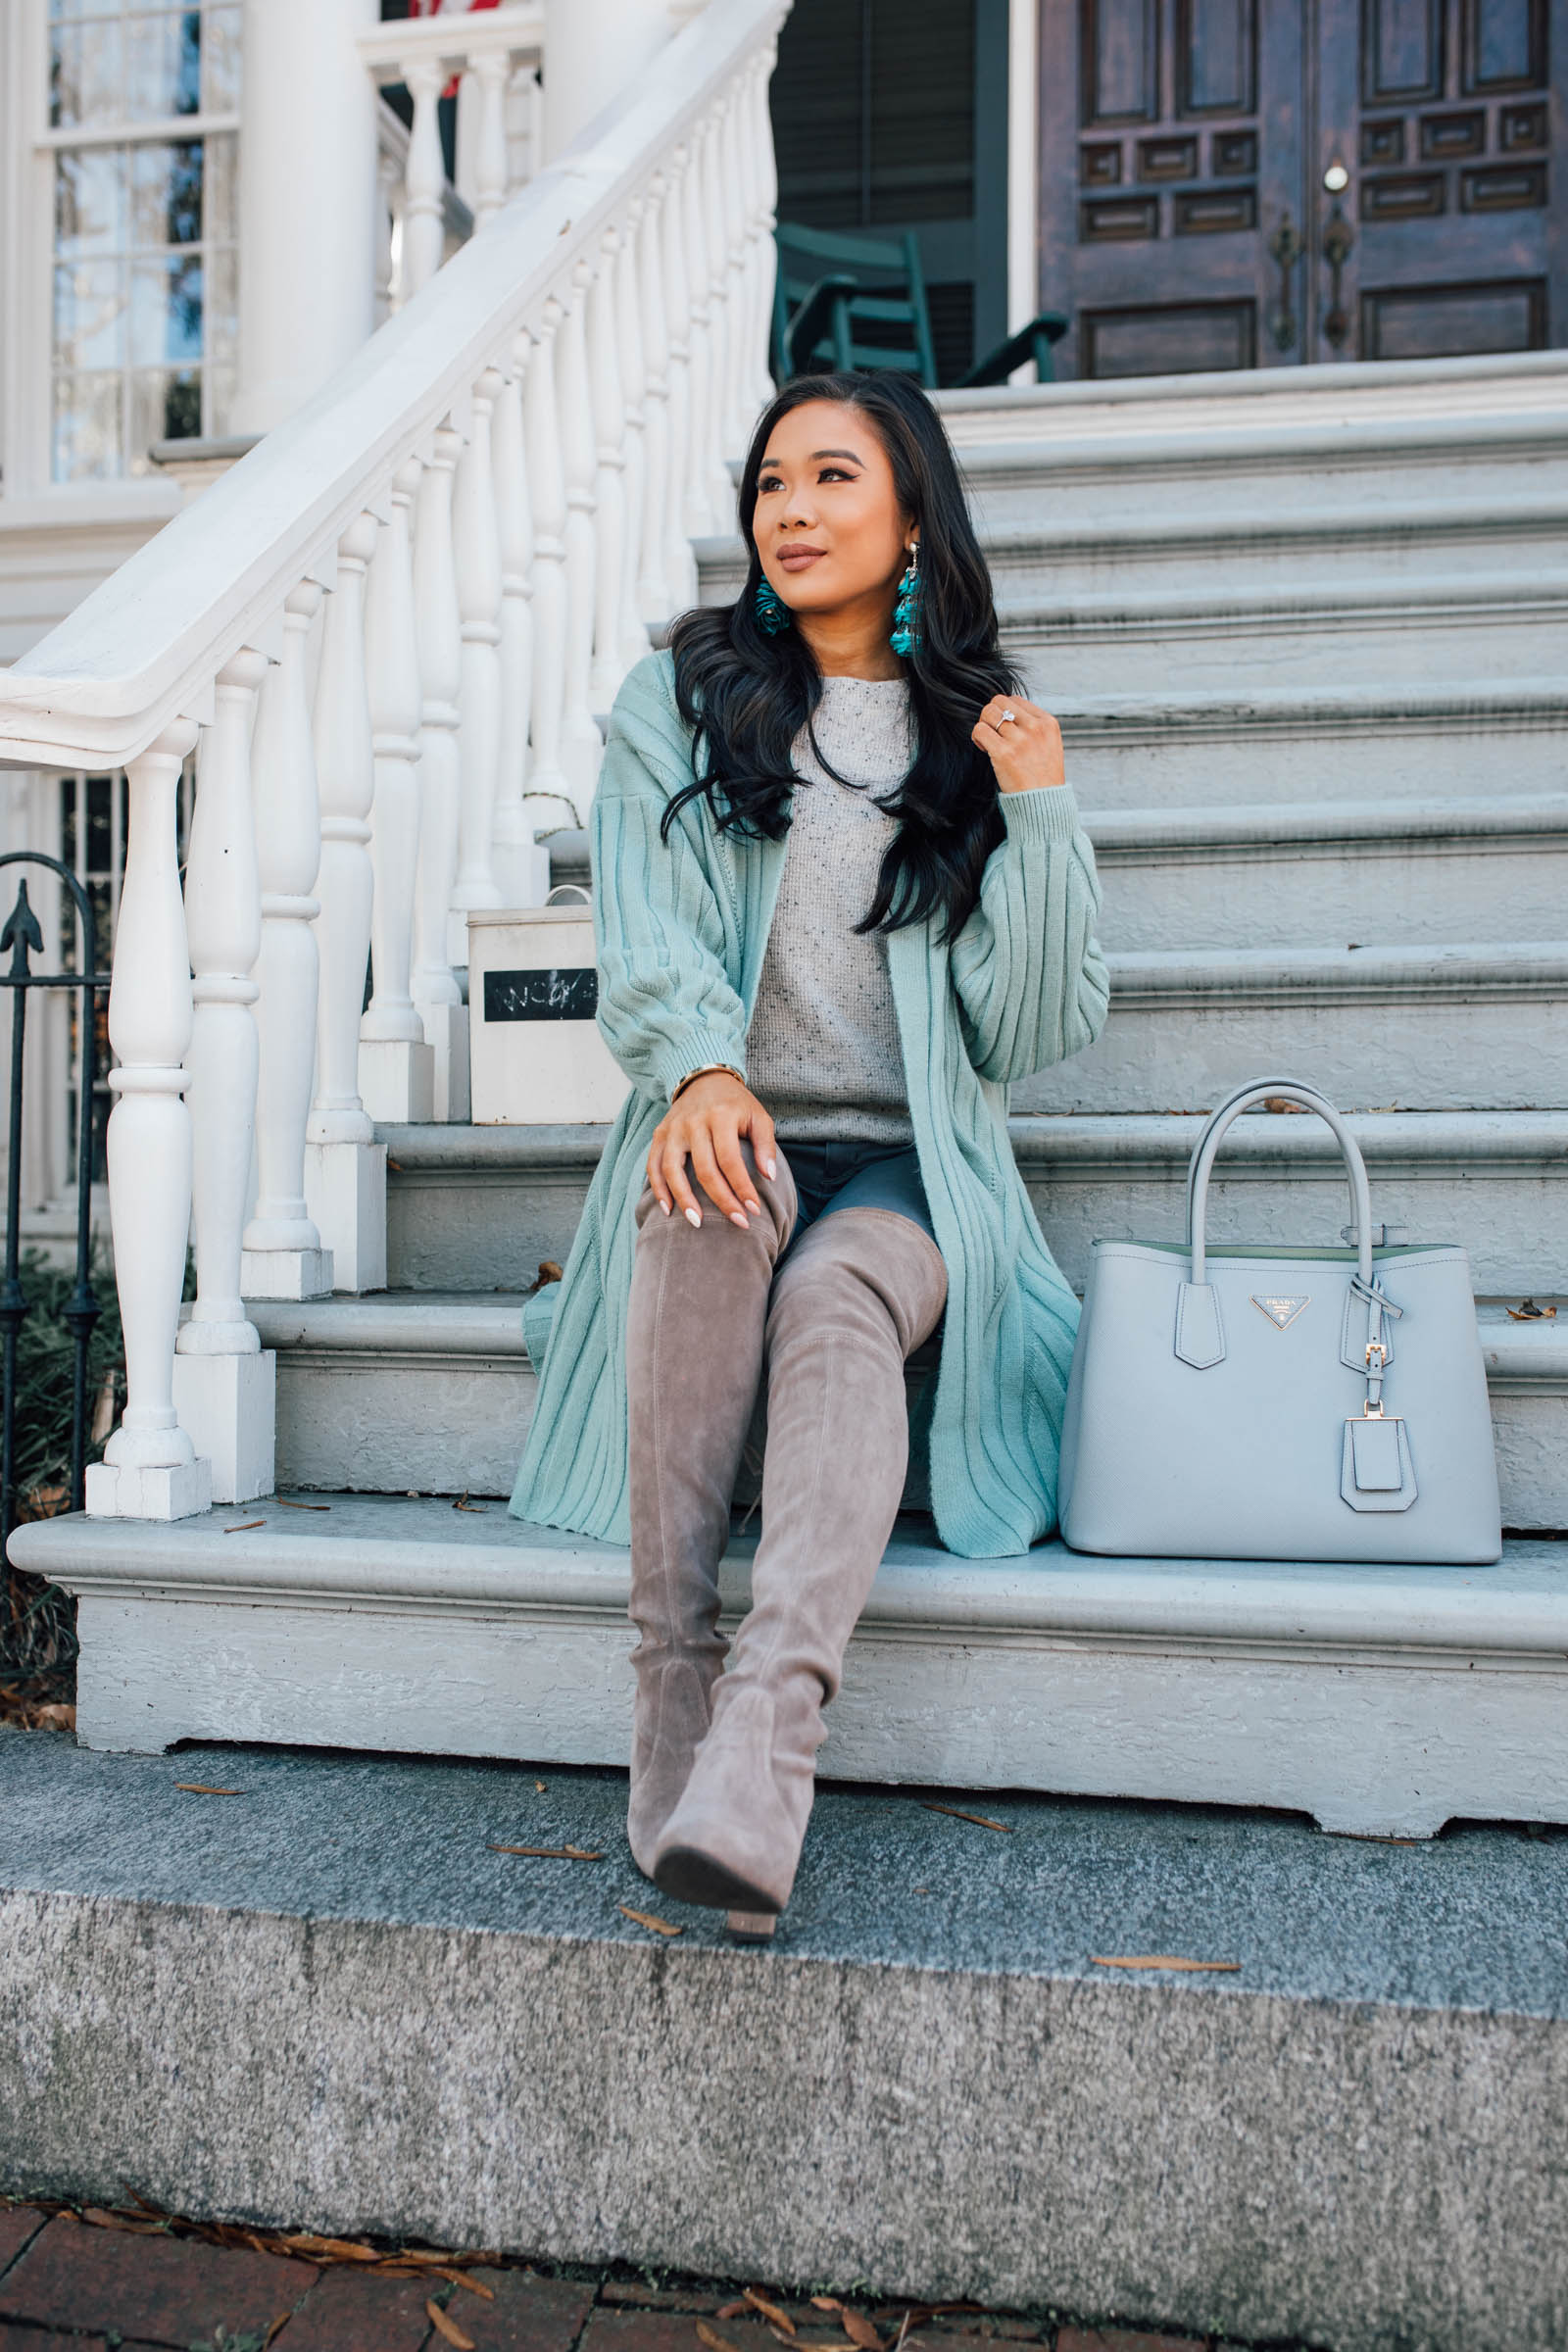 Blogger Hoang-Kim wears a mint green cardigan for fall 